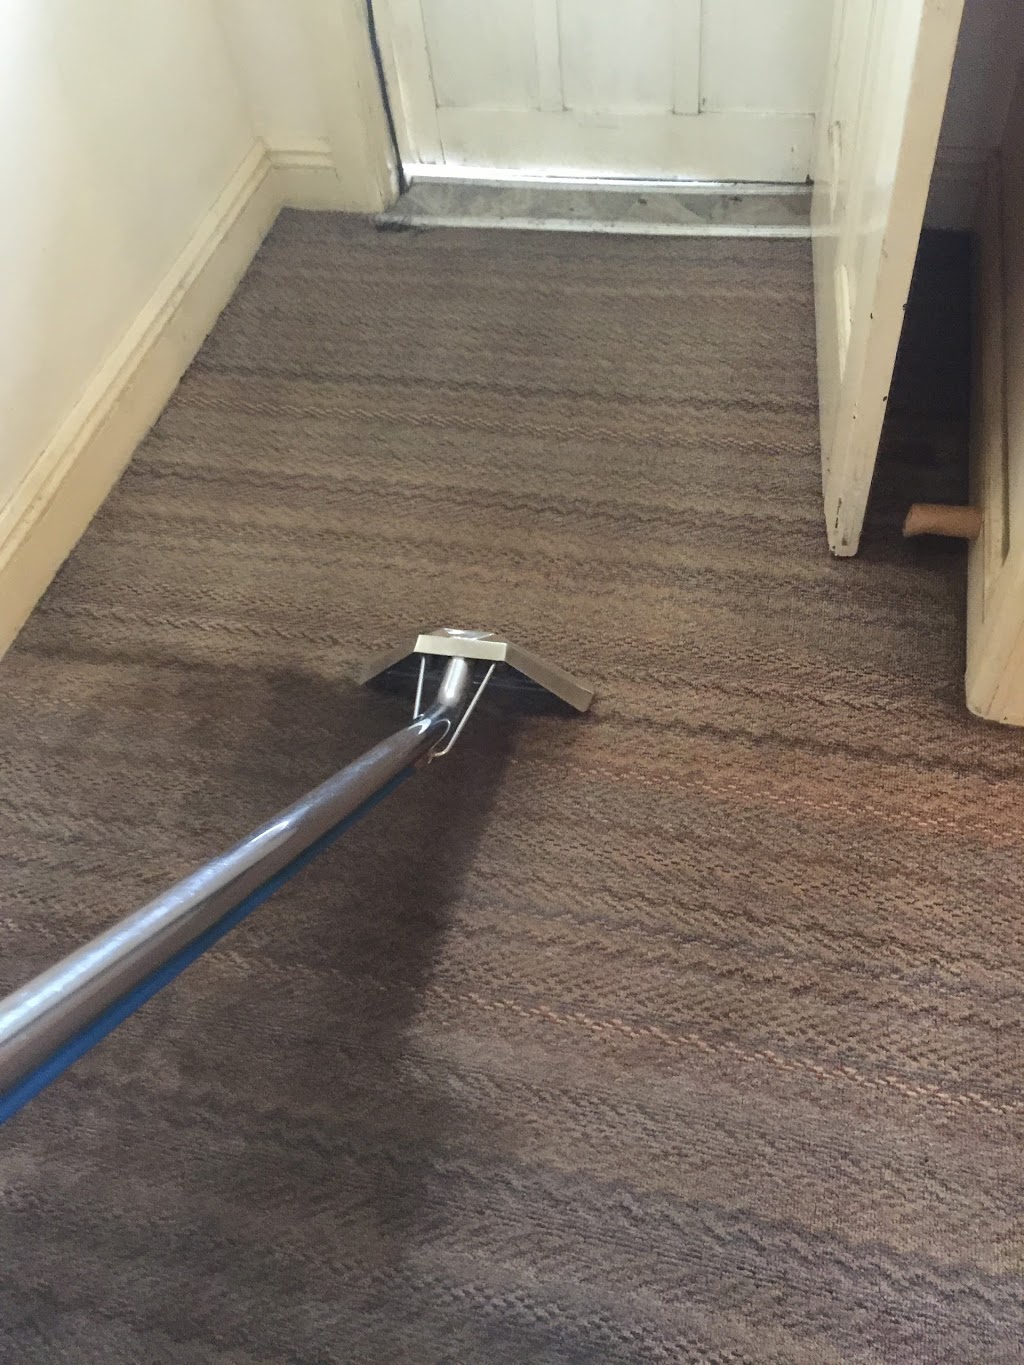 Complete Carpet & Upholstery Cleaning | laundry | 32 Rogers Avenue, Wodonga VIC 3690, Australia | 0401264515 OR +61 401 264 515